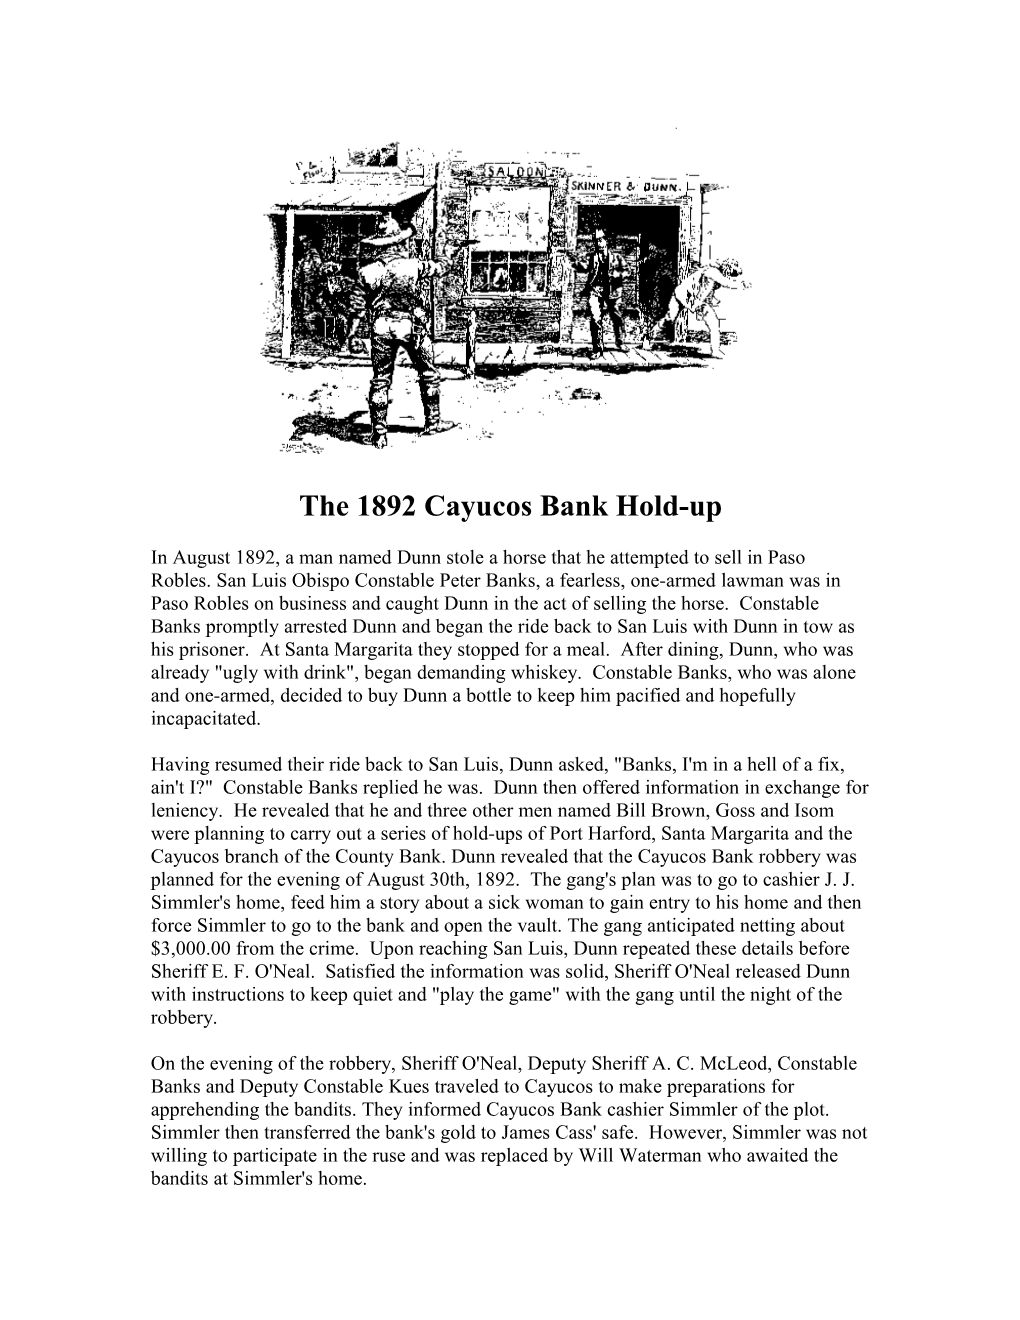 The 1892 Cayucos Bank Hold-Up